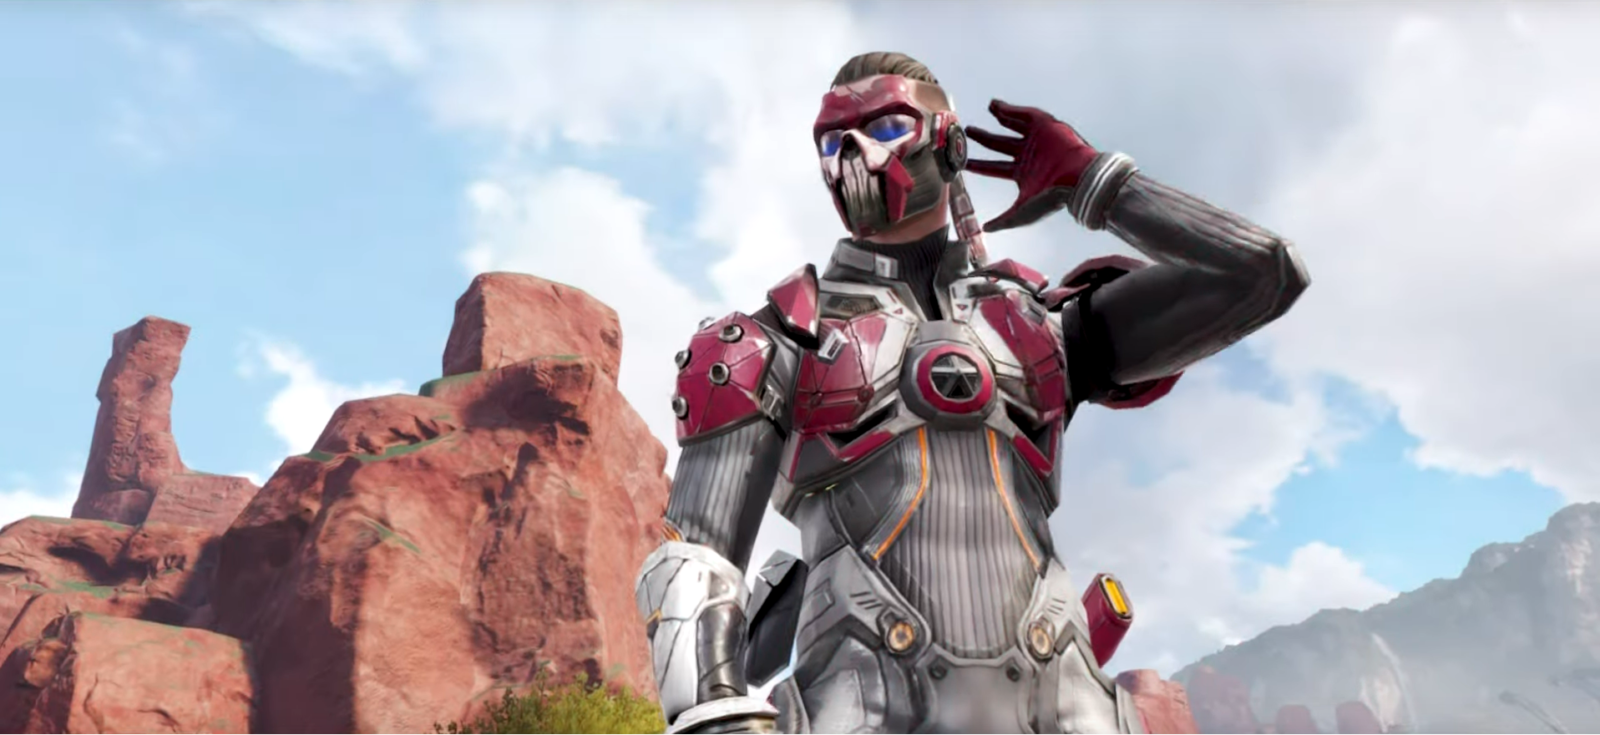 Apex-Legends-Mobile-introduces-the-first-mobile-legend